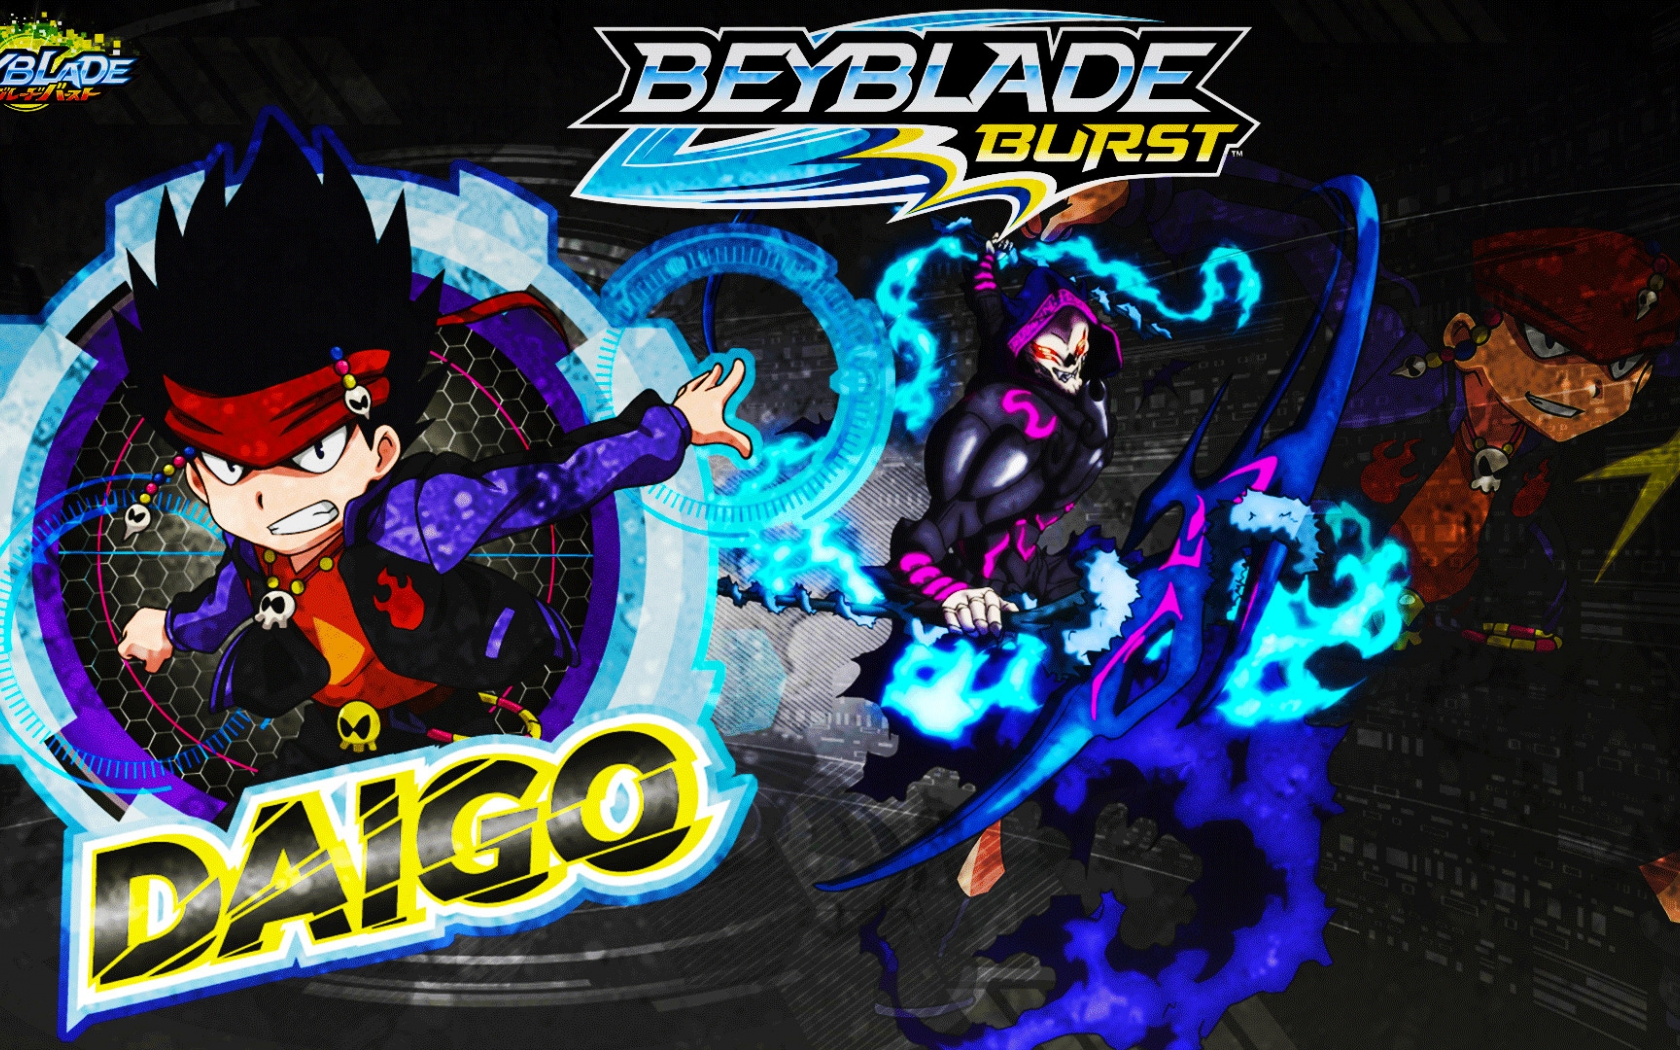 Free download 64 Beyblade Hd Wallpapers.